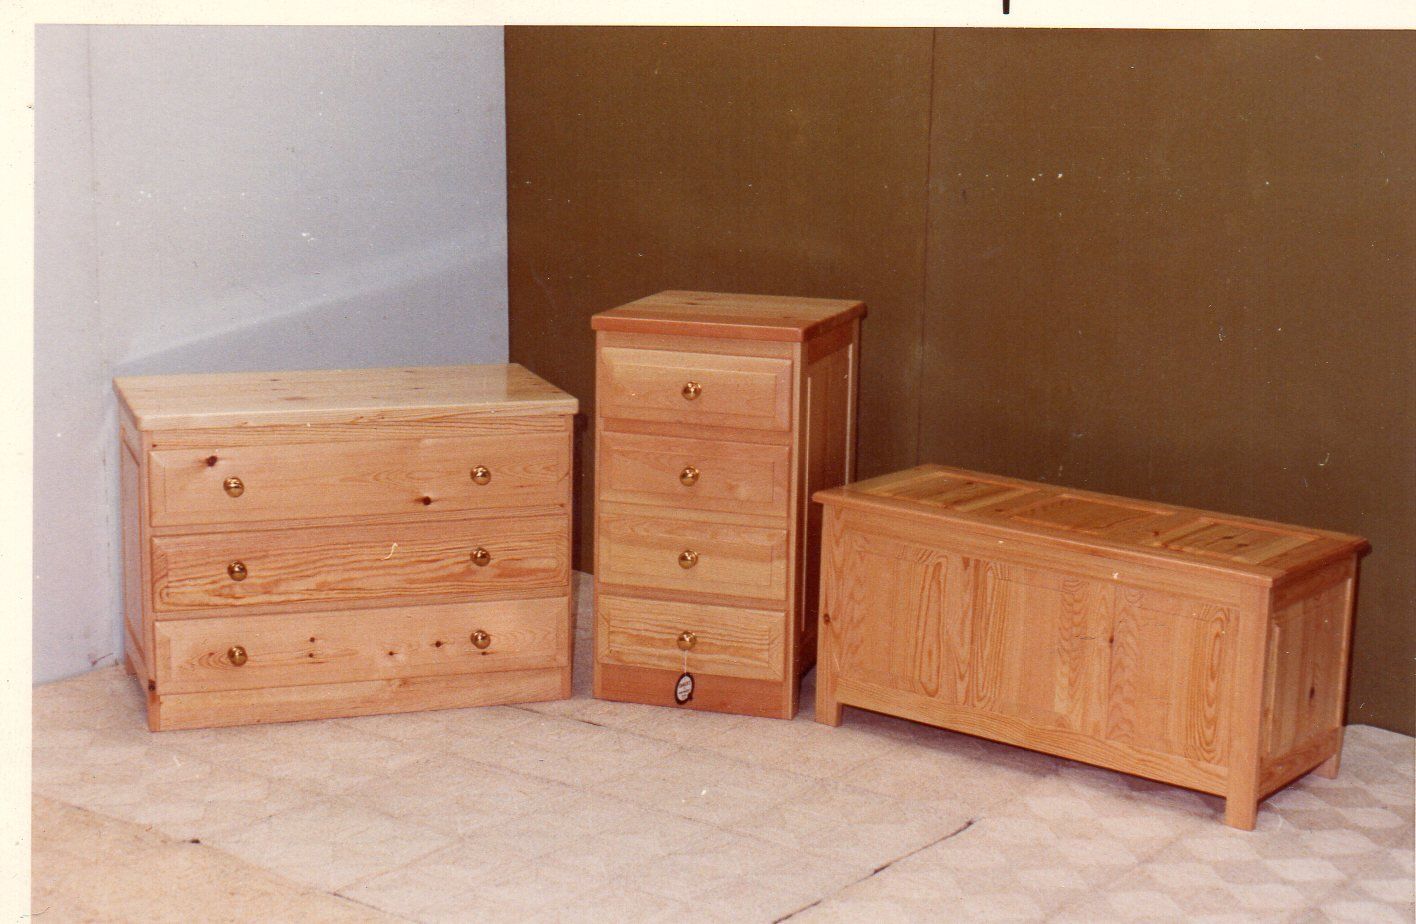 Solid Pine Chests made at Quaeck's factory